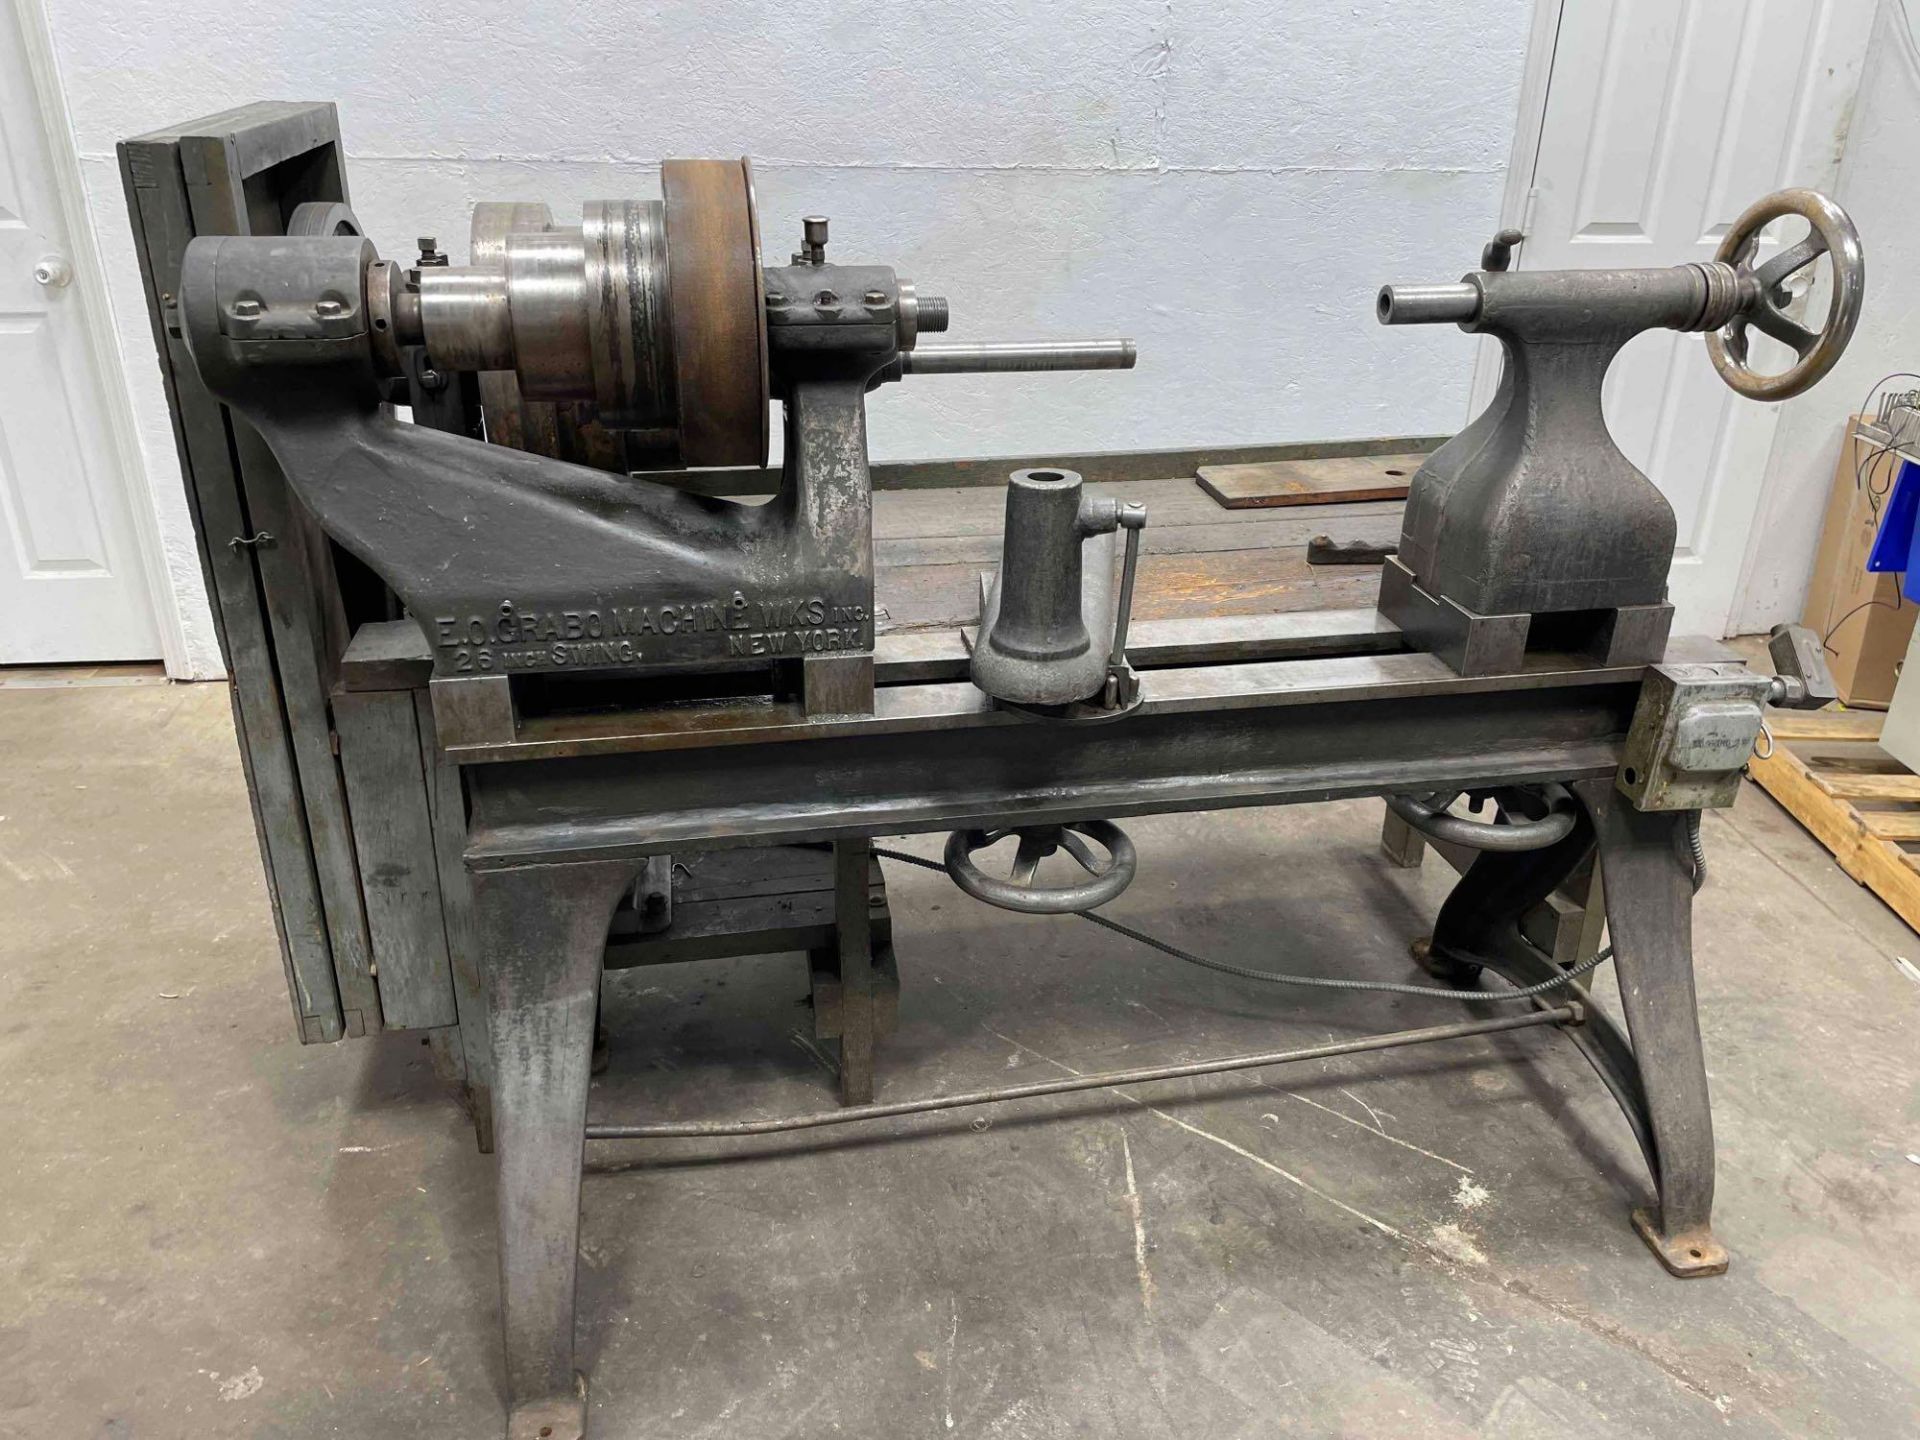 E.O.Grabo Machine Wks Spinning Lathe, 26 in Swing, 24" Between Centers, 1.5 HP, 1 Phase, 208V   $50 - Image 4 of 19